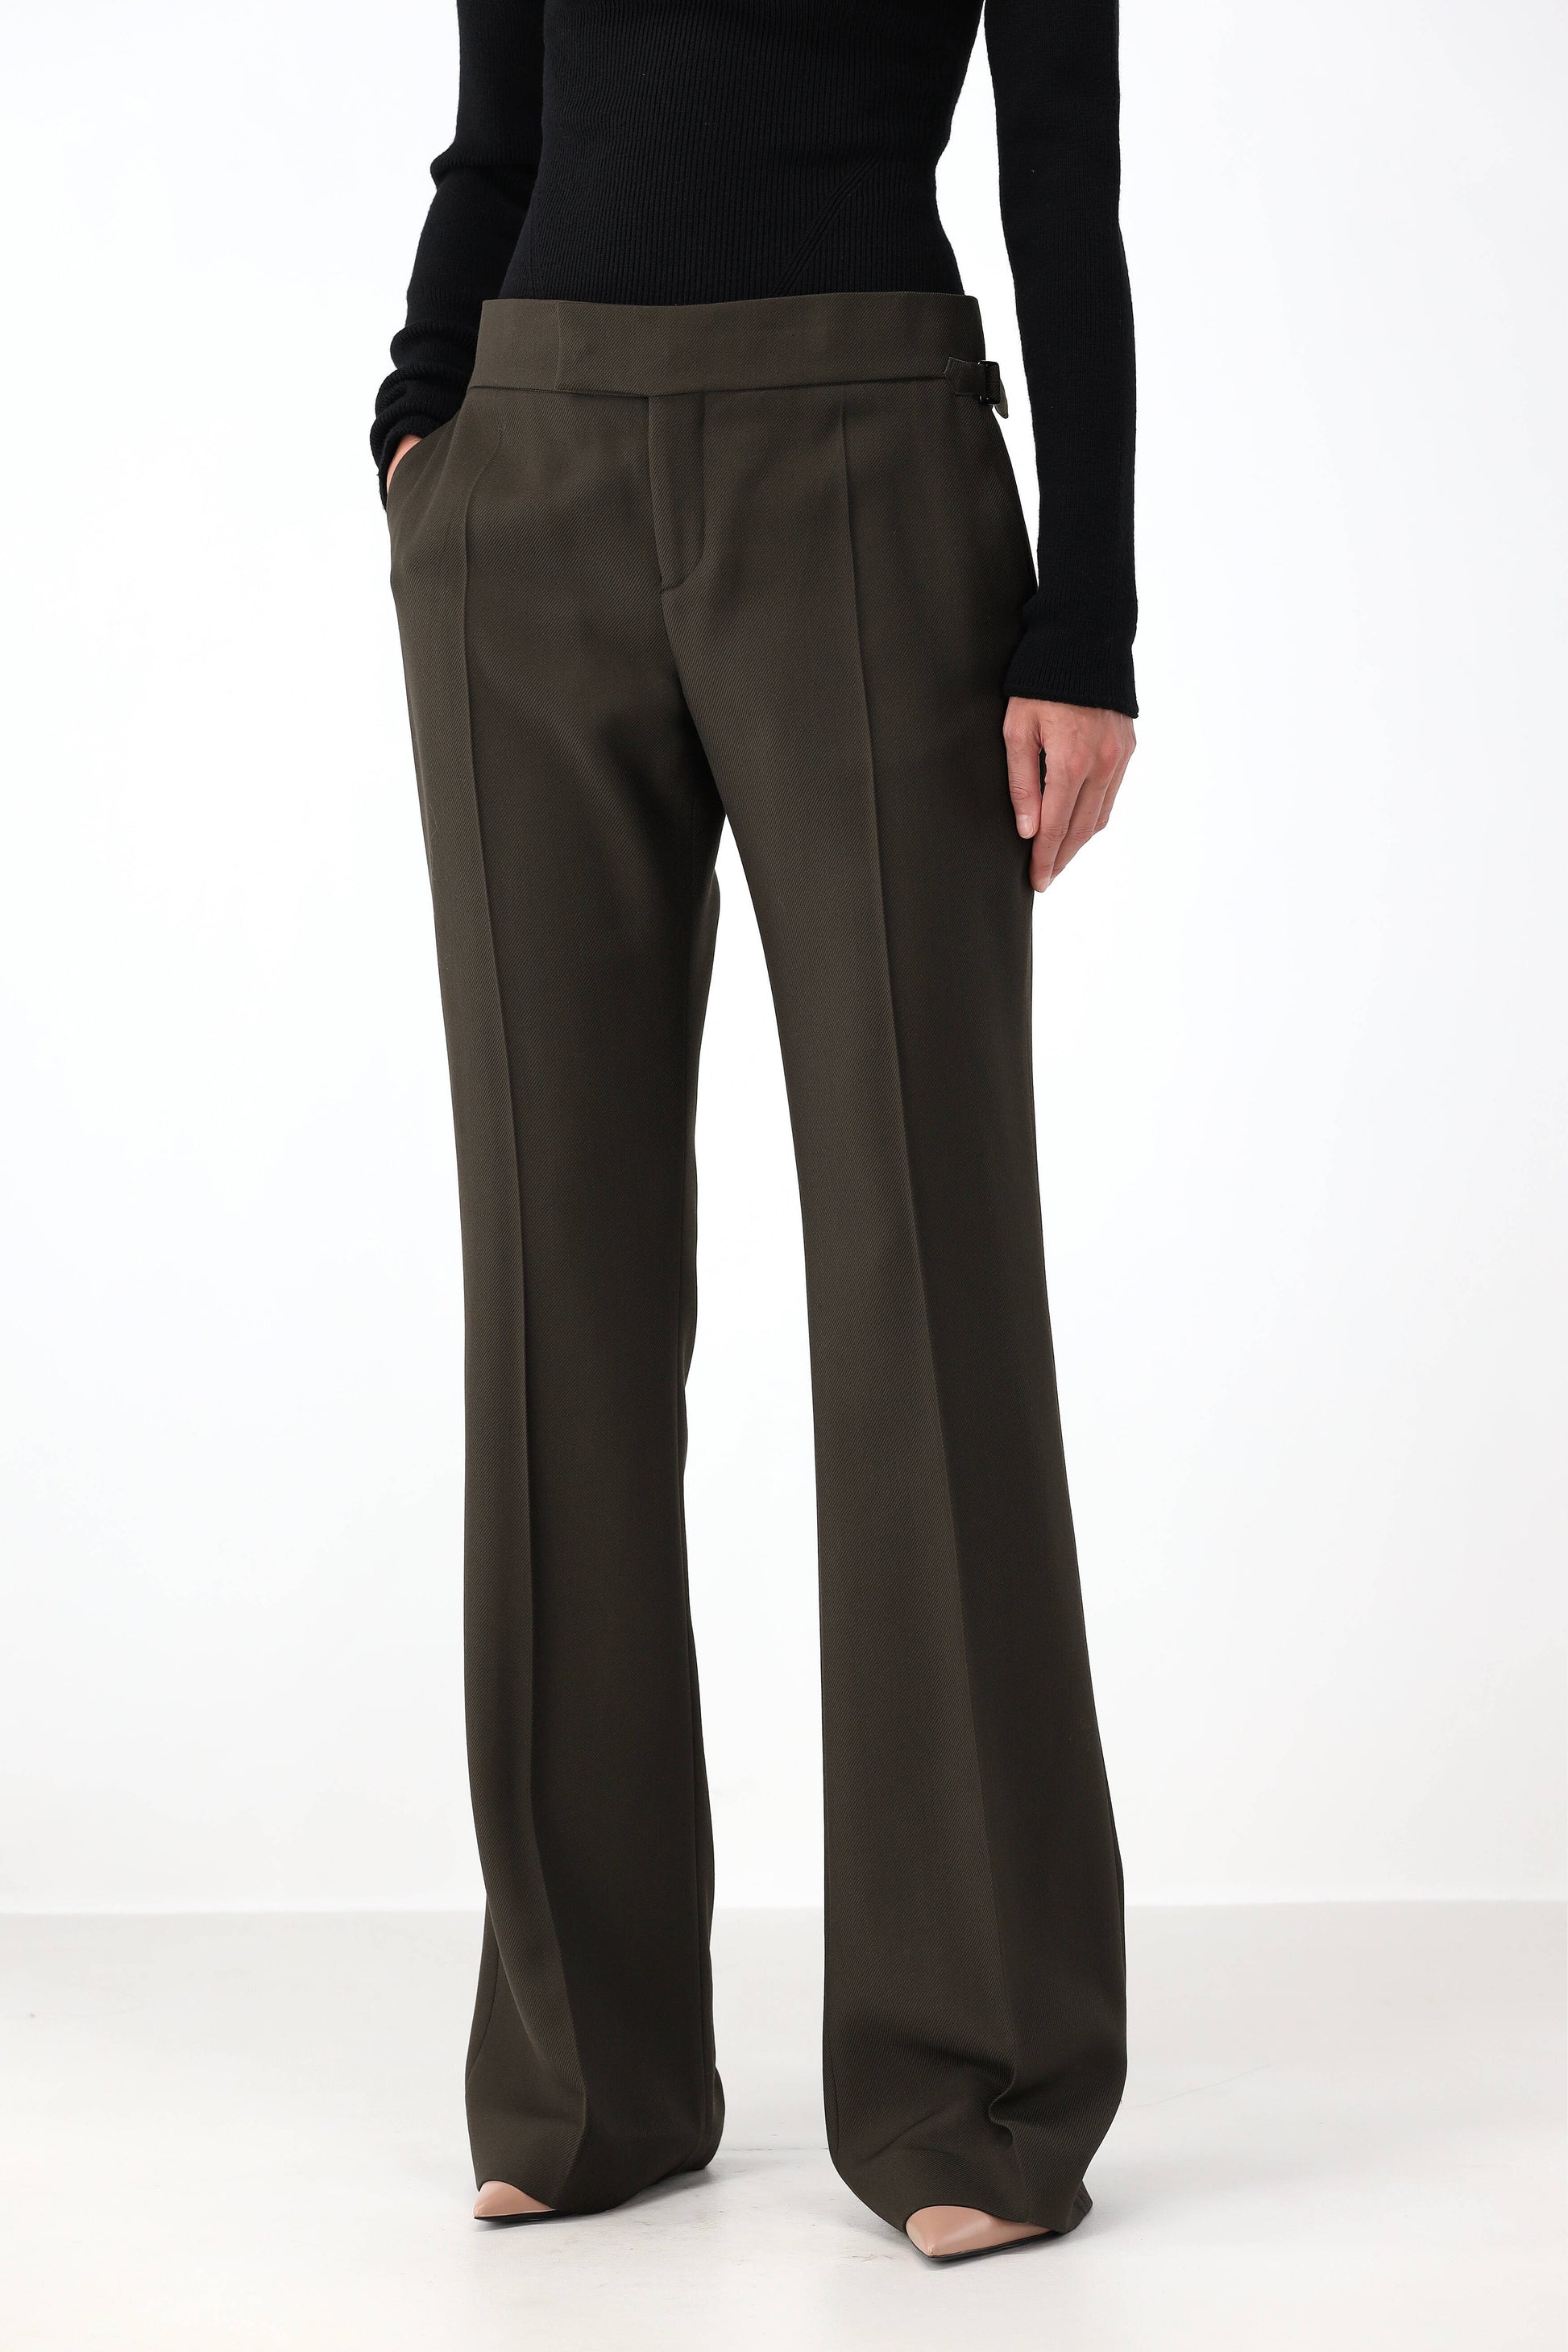 Hose Flared in Military GreenTom Ford - Anita Hass